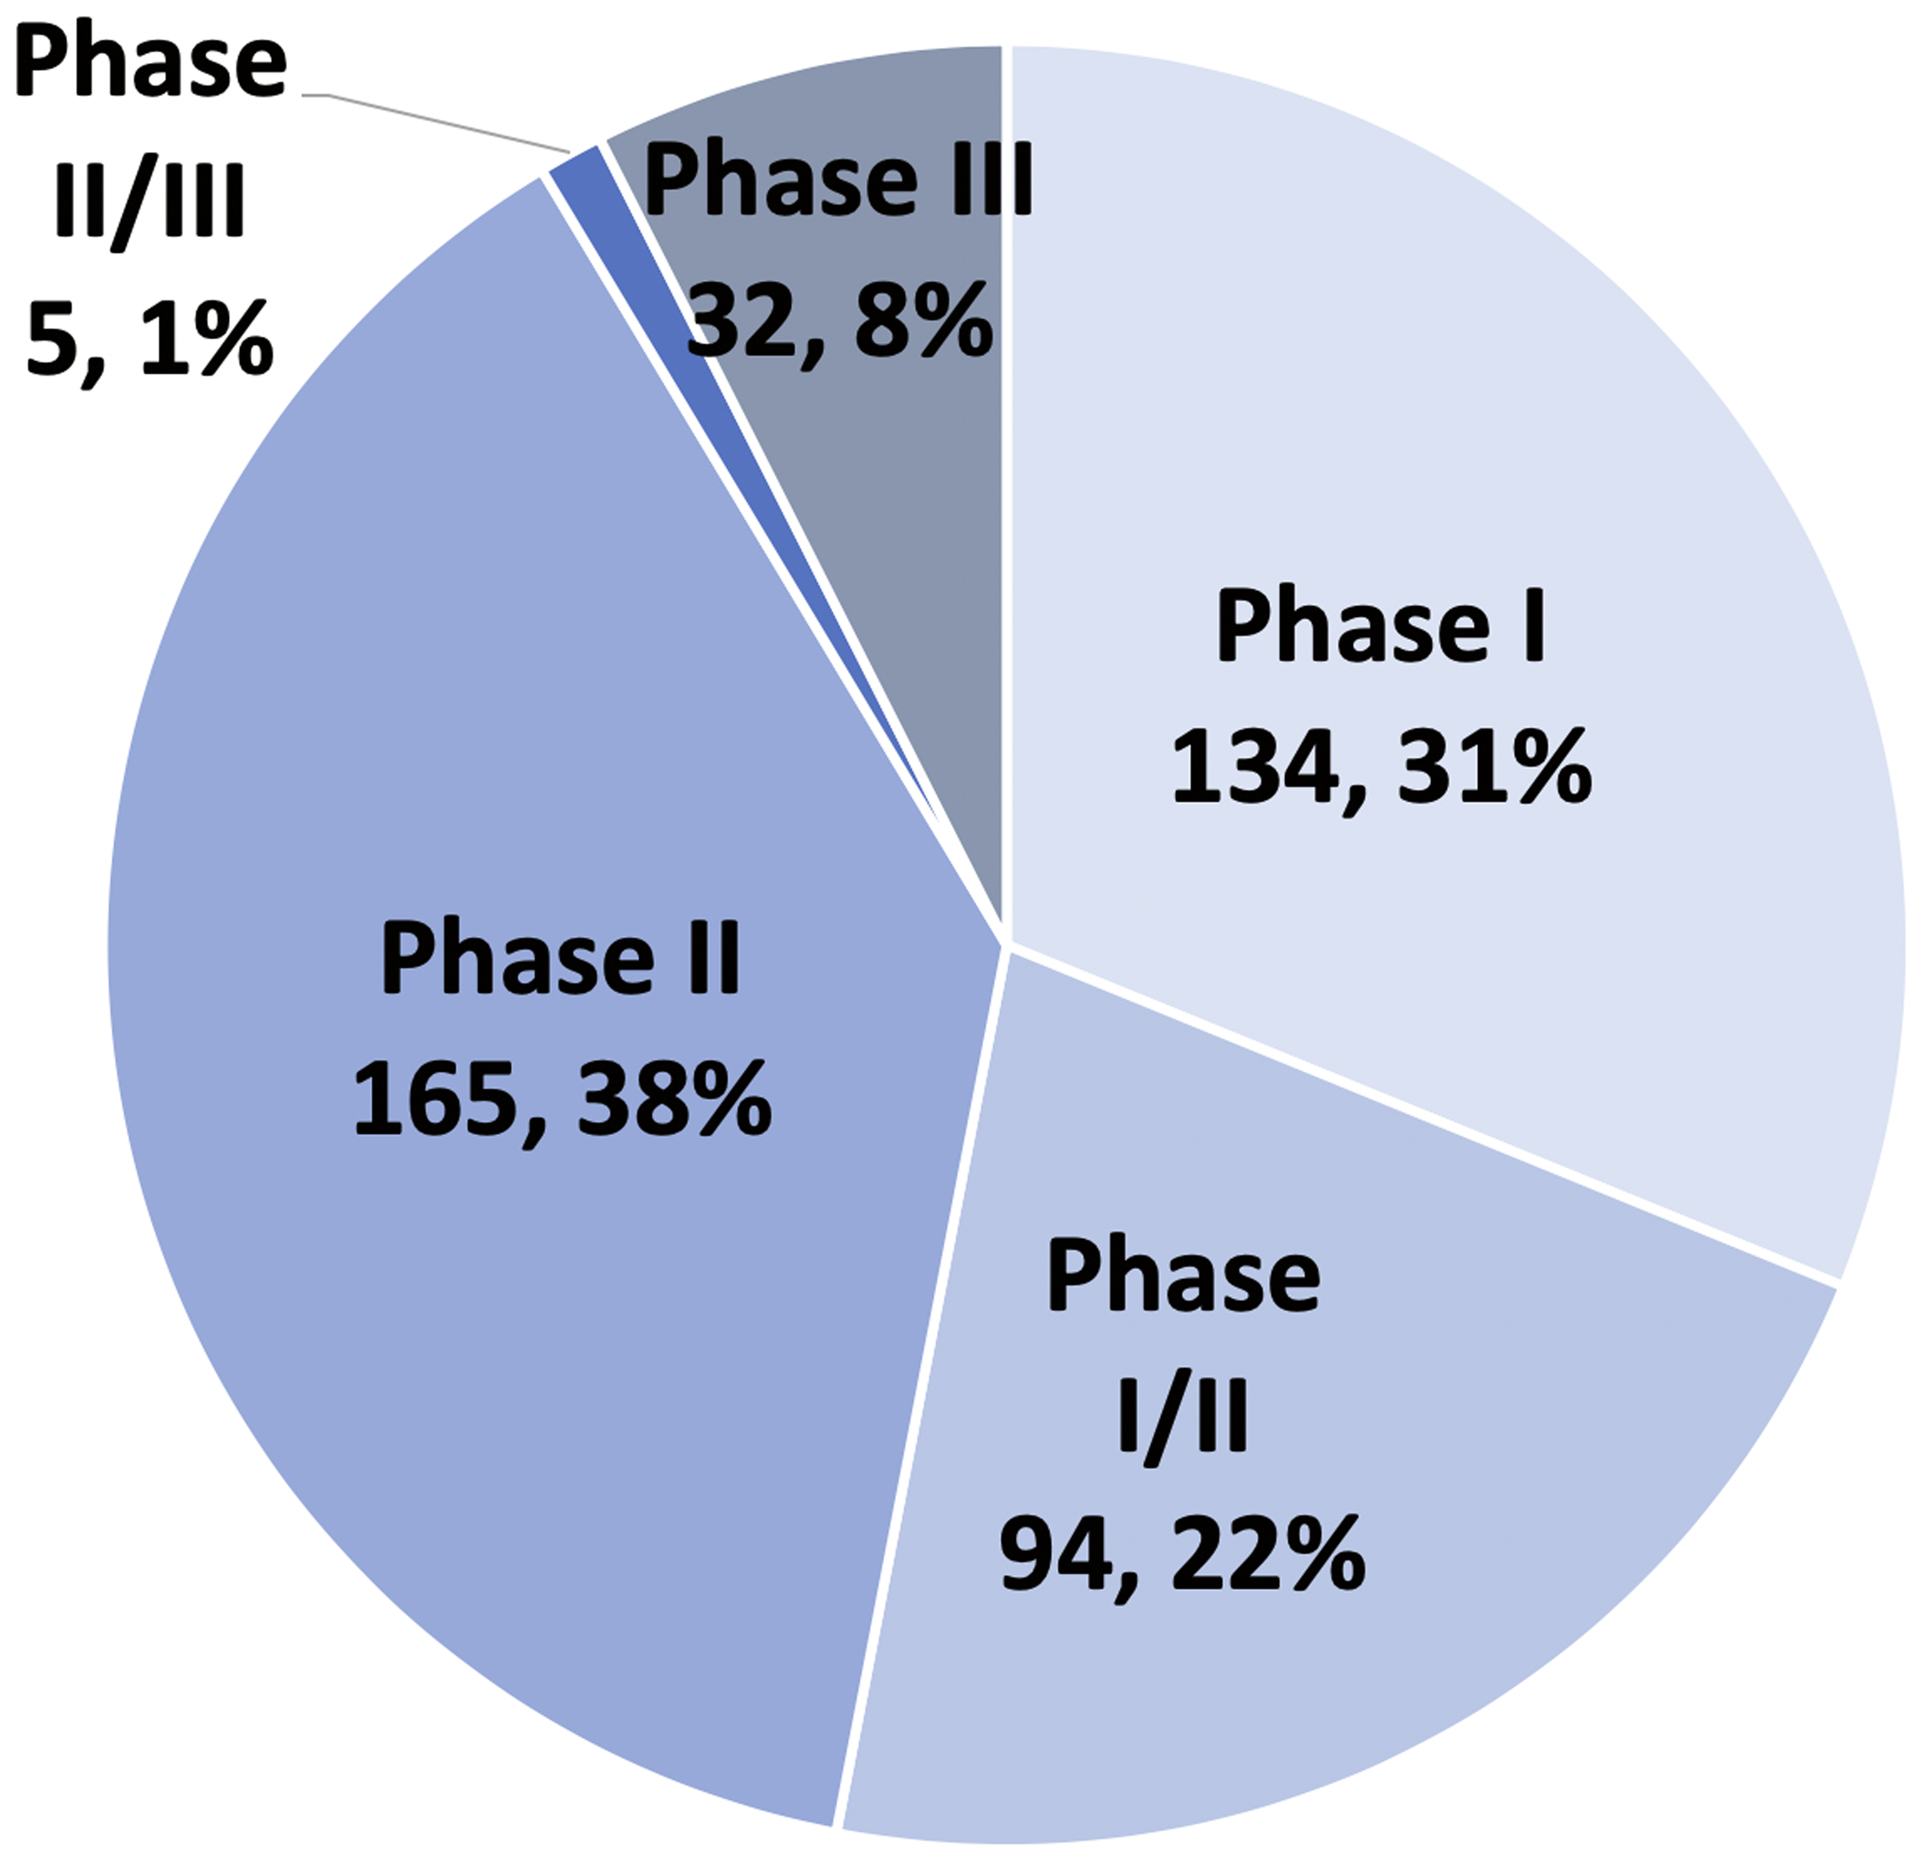 Clinical phase of 430 PDAC trials.